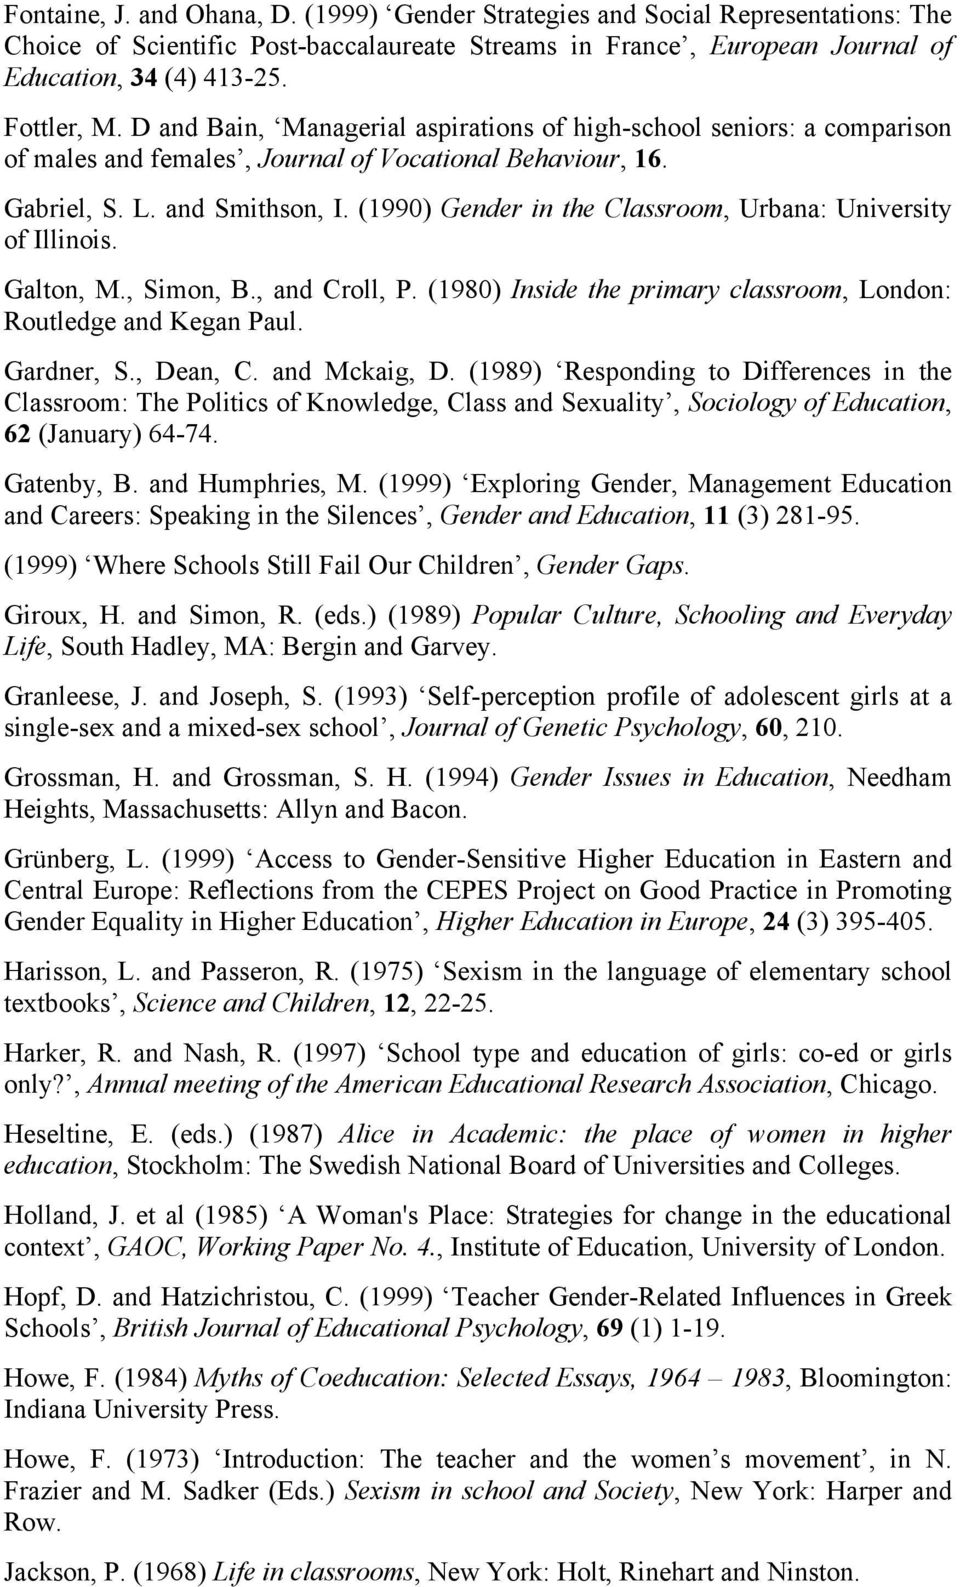 (1990) Gender in the Classroom, Urbana: University of Illinois. Galton, M., Simon, B., and Croll, P. (1980) Inside the primary classroom, London: Routledge and Kegan Paul. Gardner, S., Dean, C.